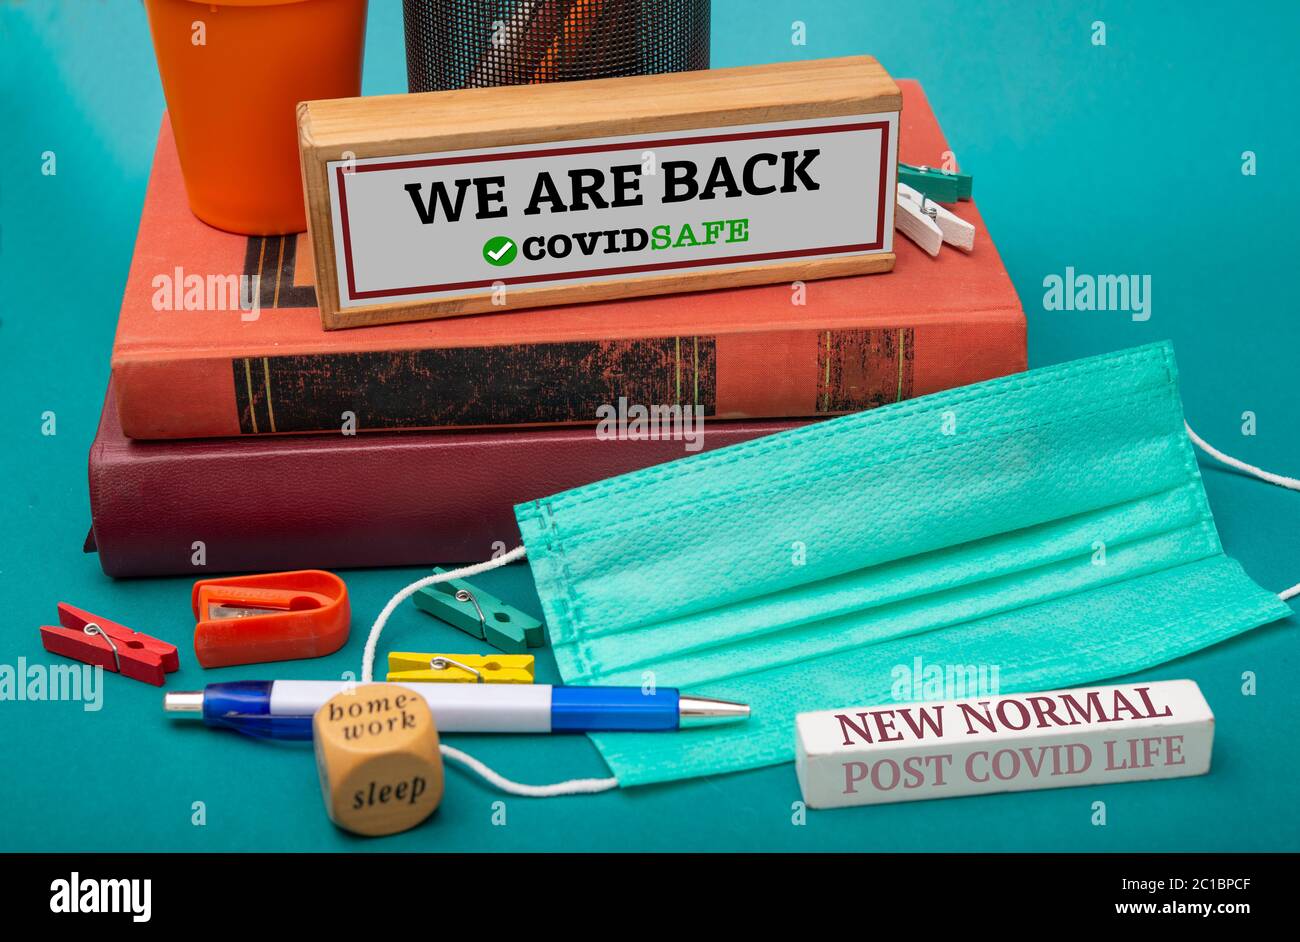 Back to School sign with covid safe text - education concept Stock Photo